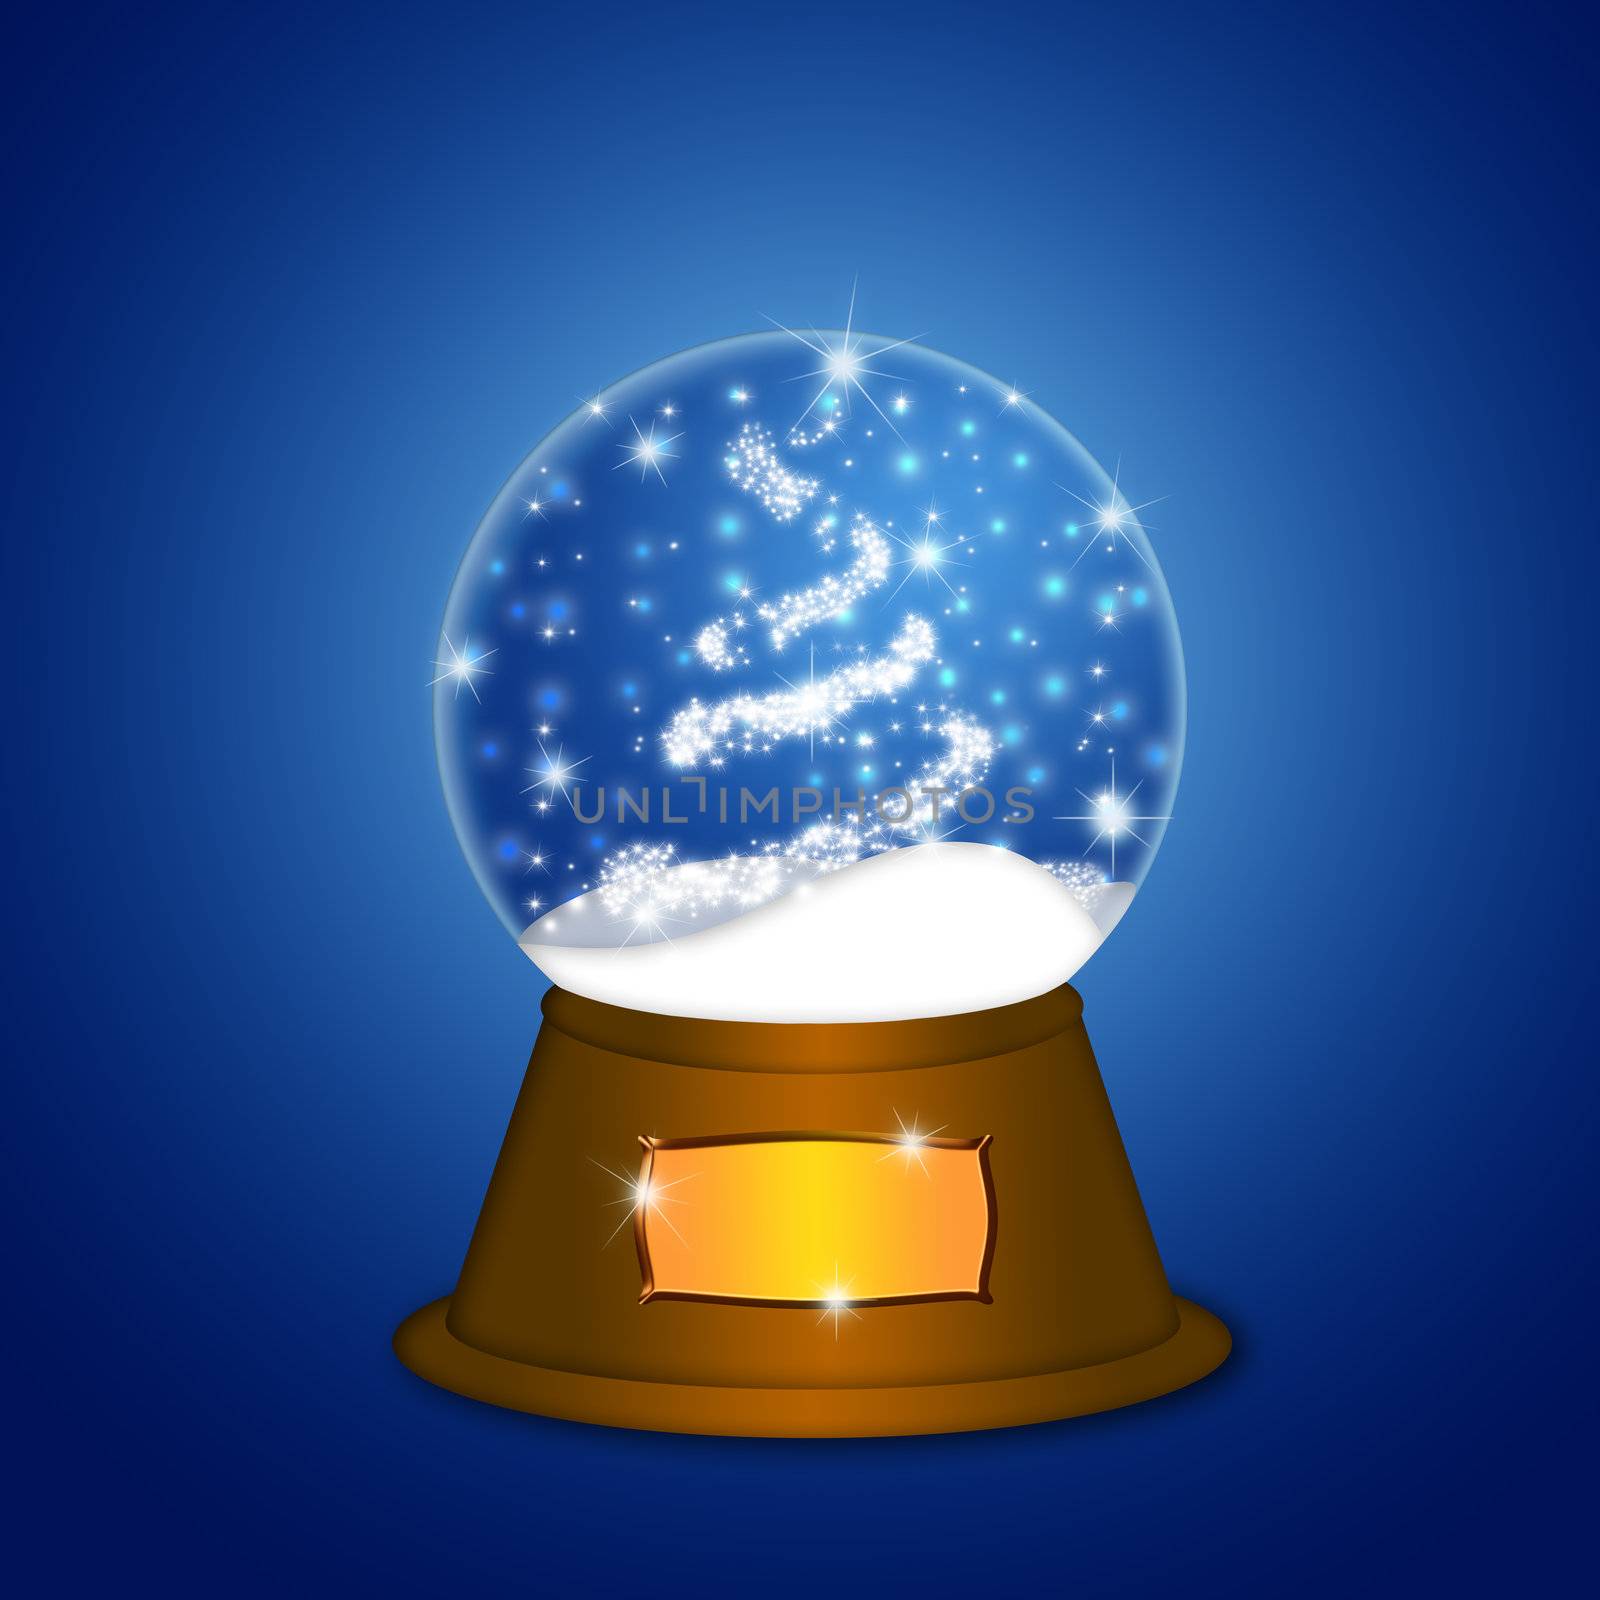 Christmas Water Snow Globe with Christmas Tree Sparkles and Snowflakes Illustration on Blue Background